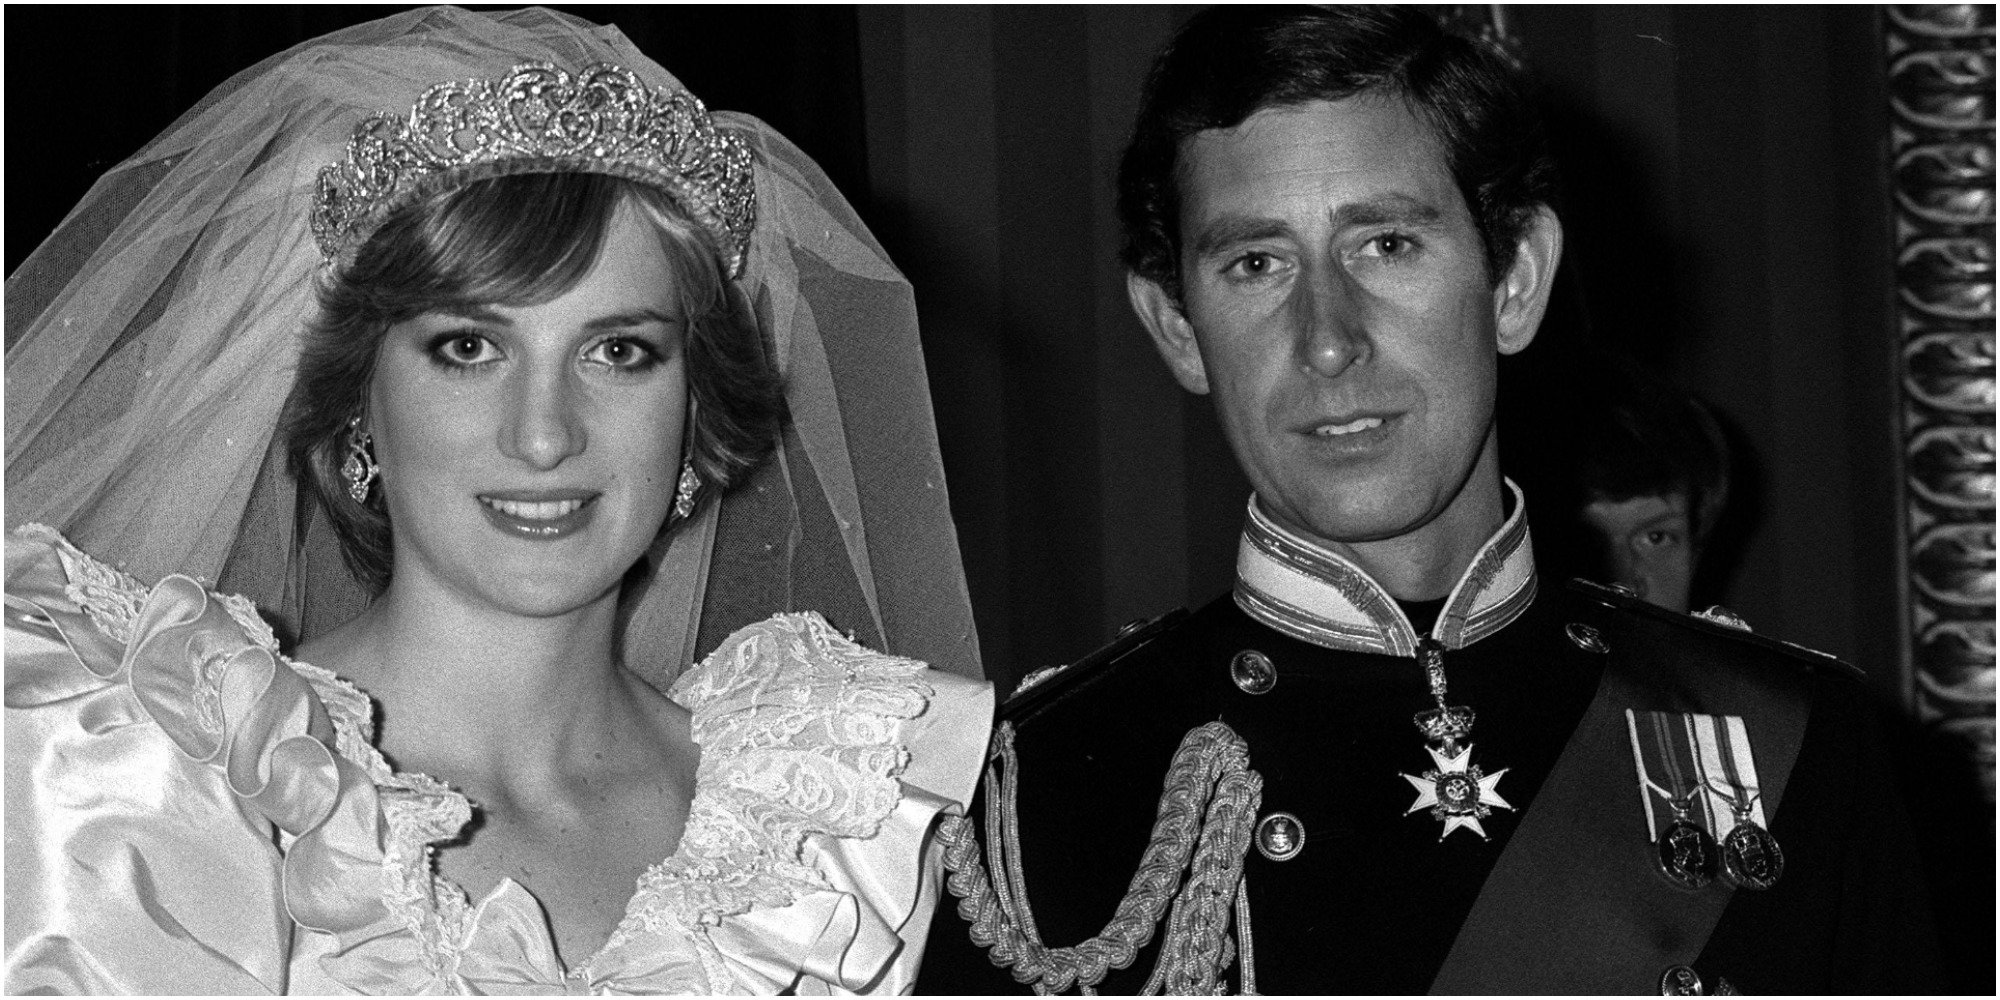 Princess Diana and Prince Charles in a black and white photo taken on their wedding day.